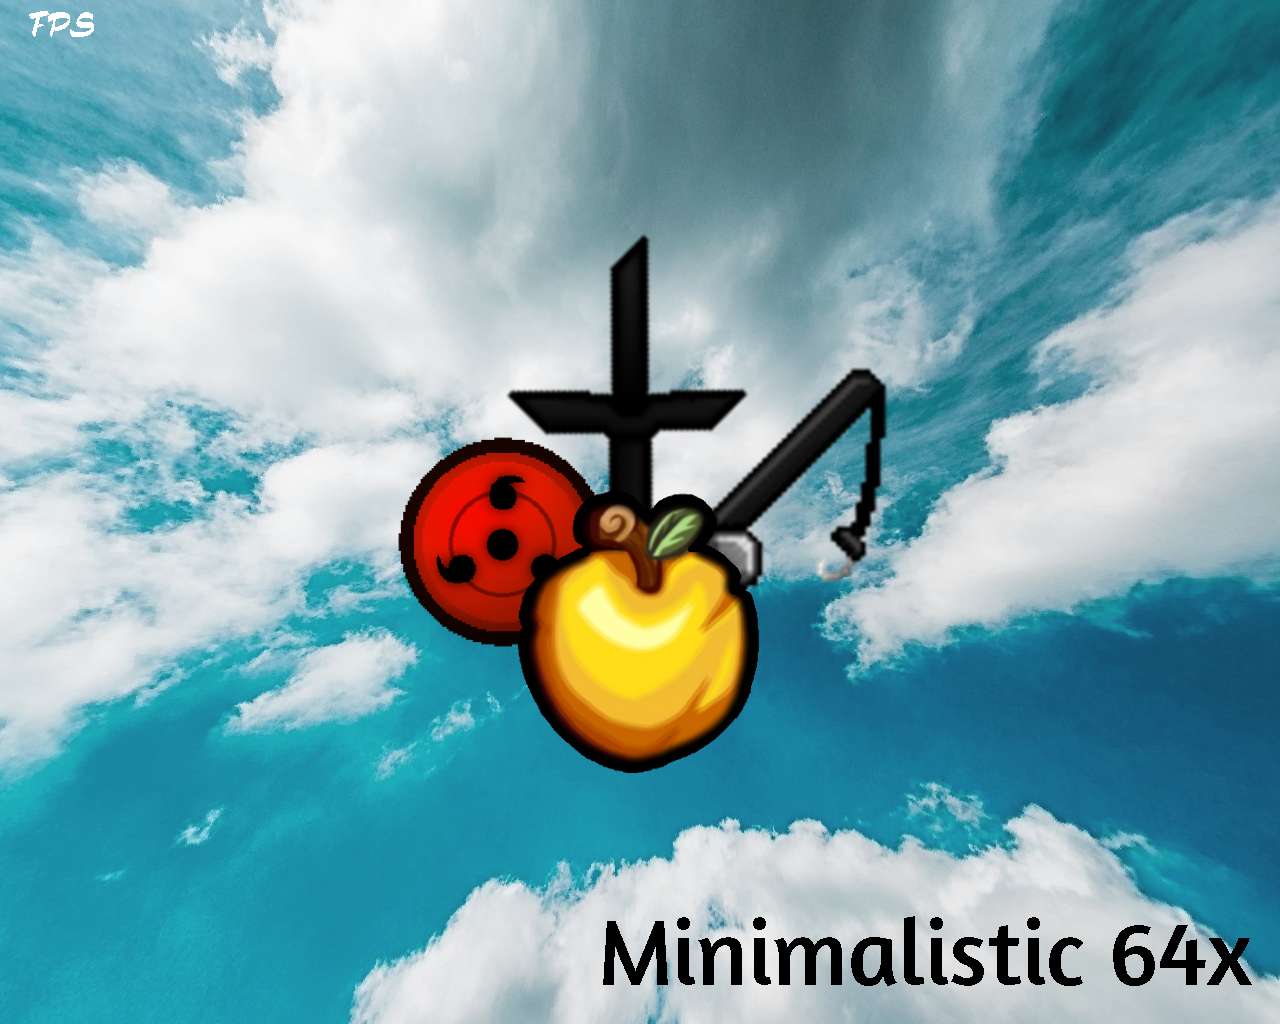 Gallery Banner for Minimalistic on PvPRP